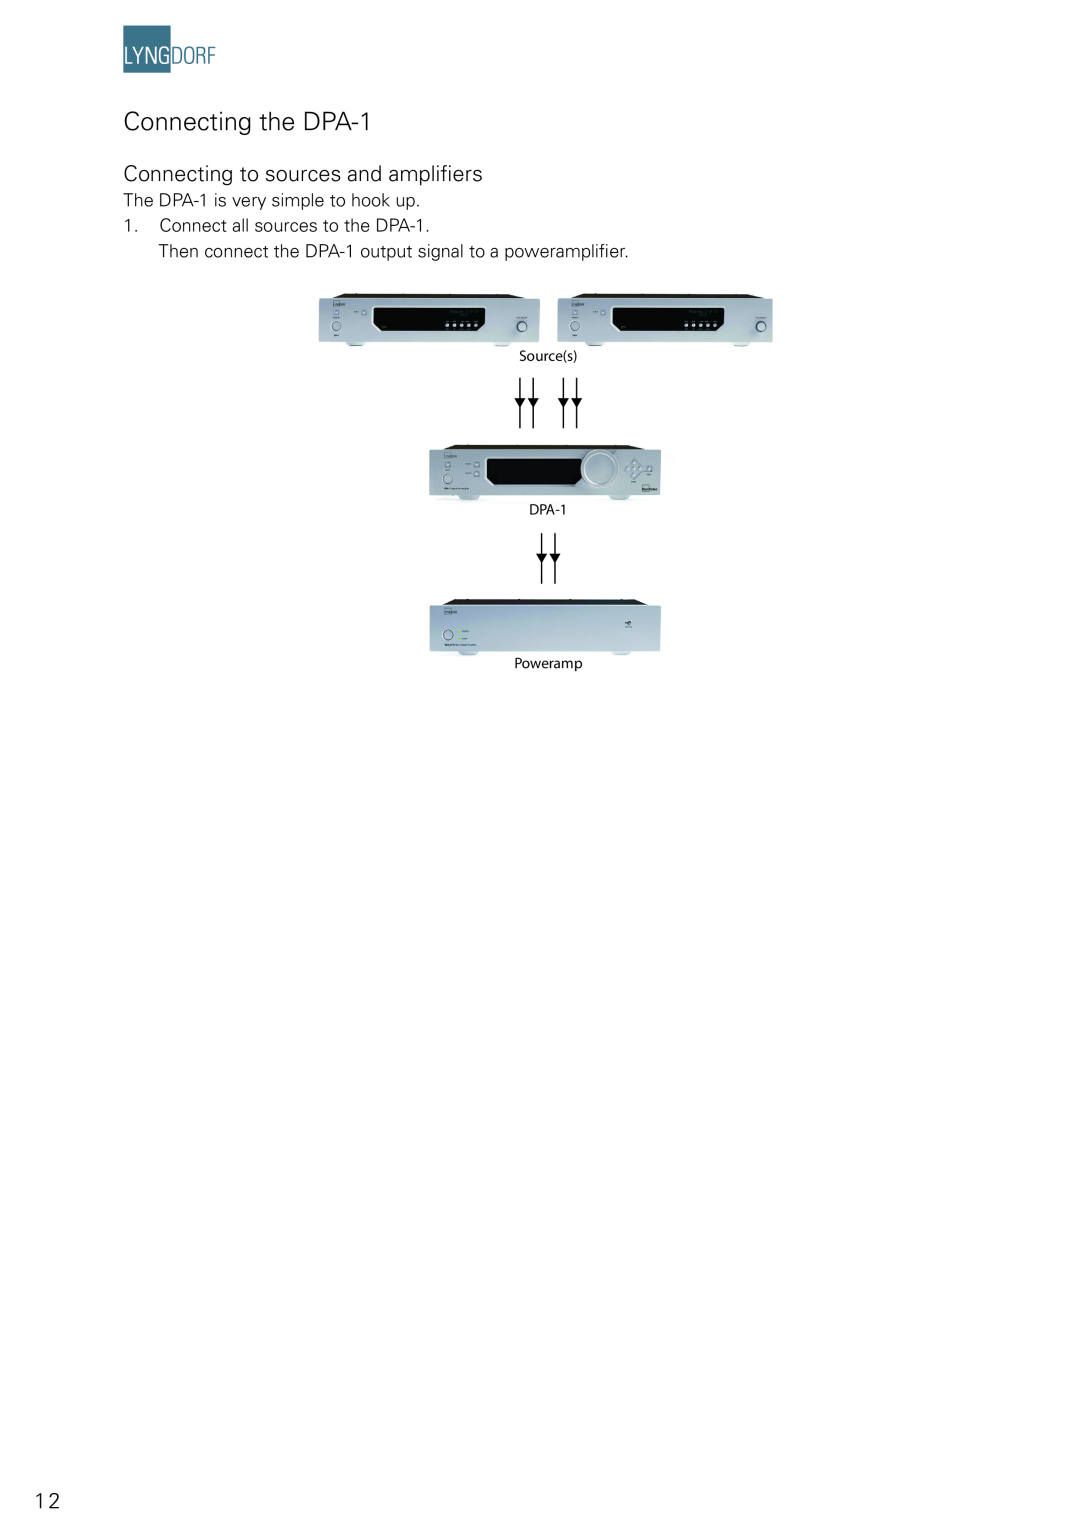 Lyngdorf Audio owner manual Connecting the DPA-1, Connecting to sources and ampliﬁers, Sources, DPA-1 Poweramp 